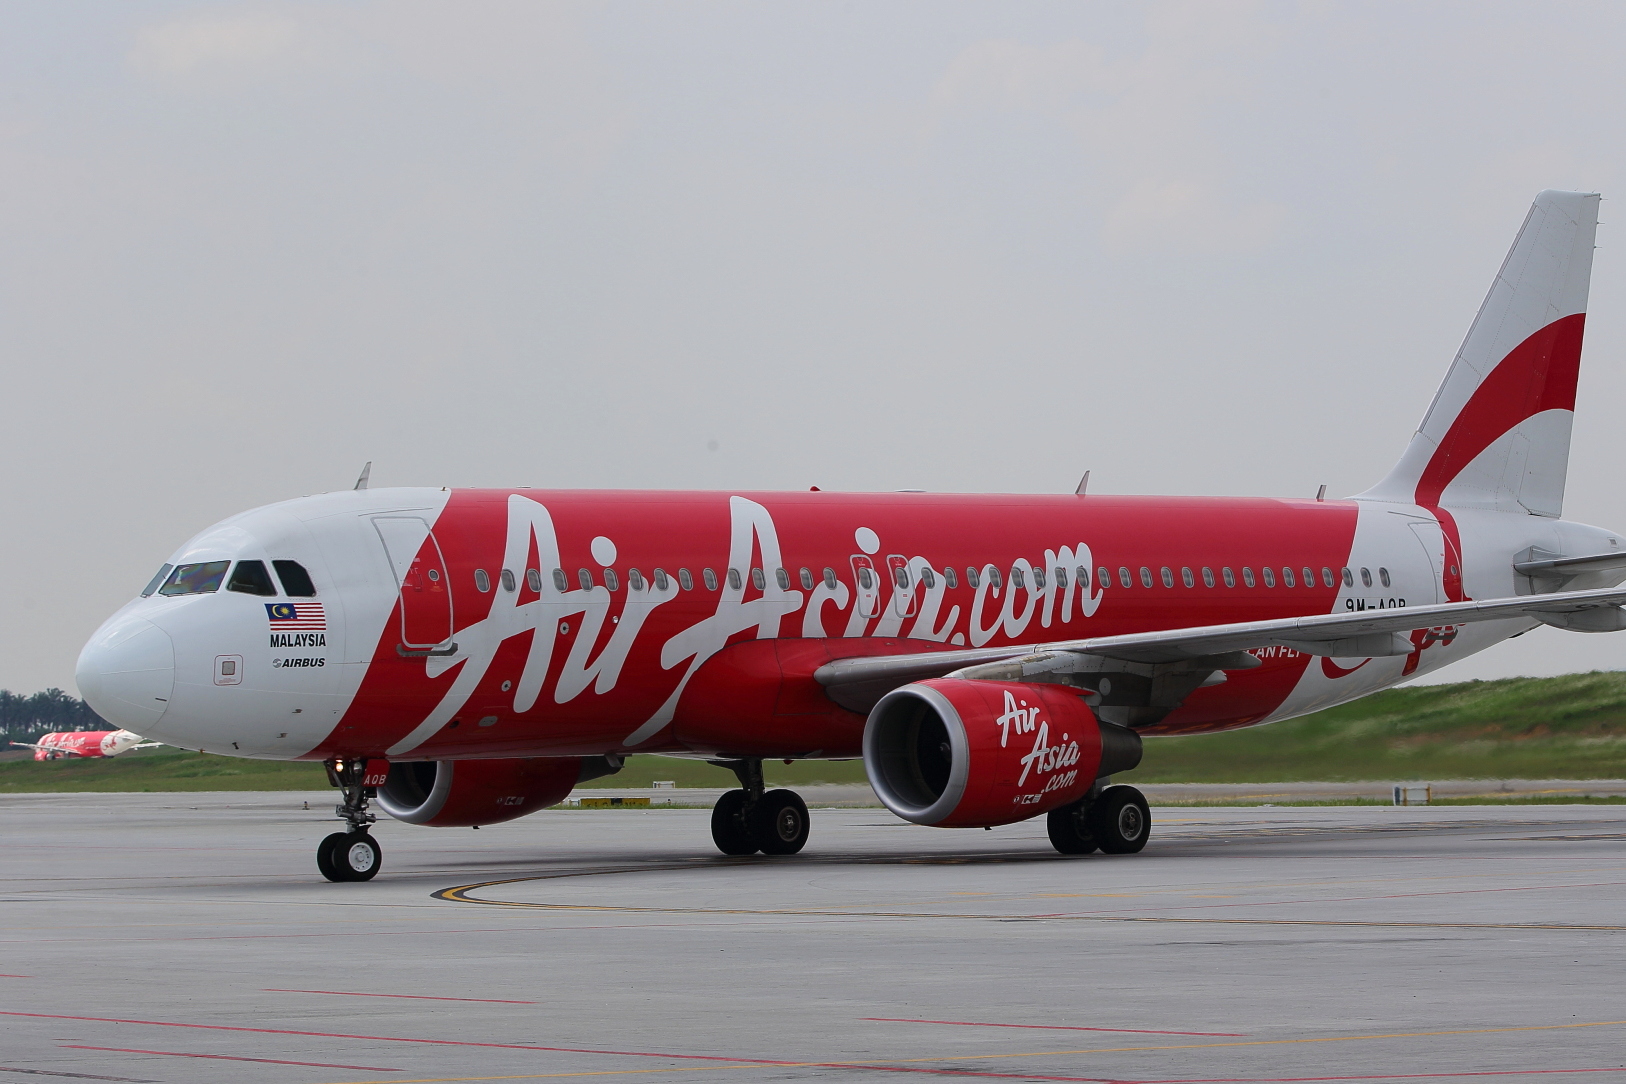 AirAsia Malaysia A320 at klia2. Picture by Steven Howard of TravelNewsAsia.com Click to enlarge.